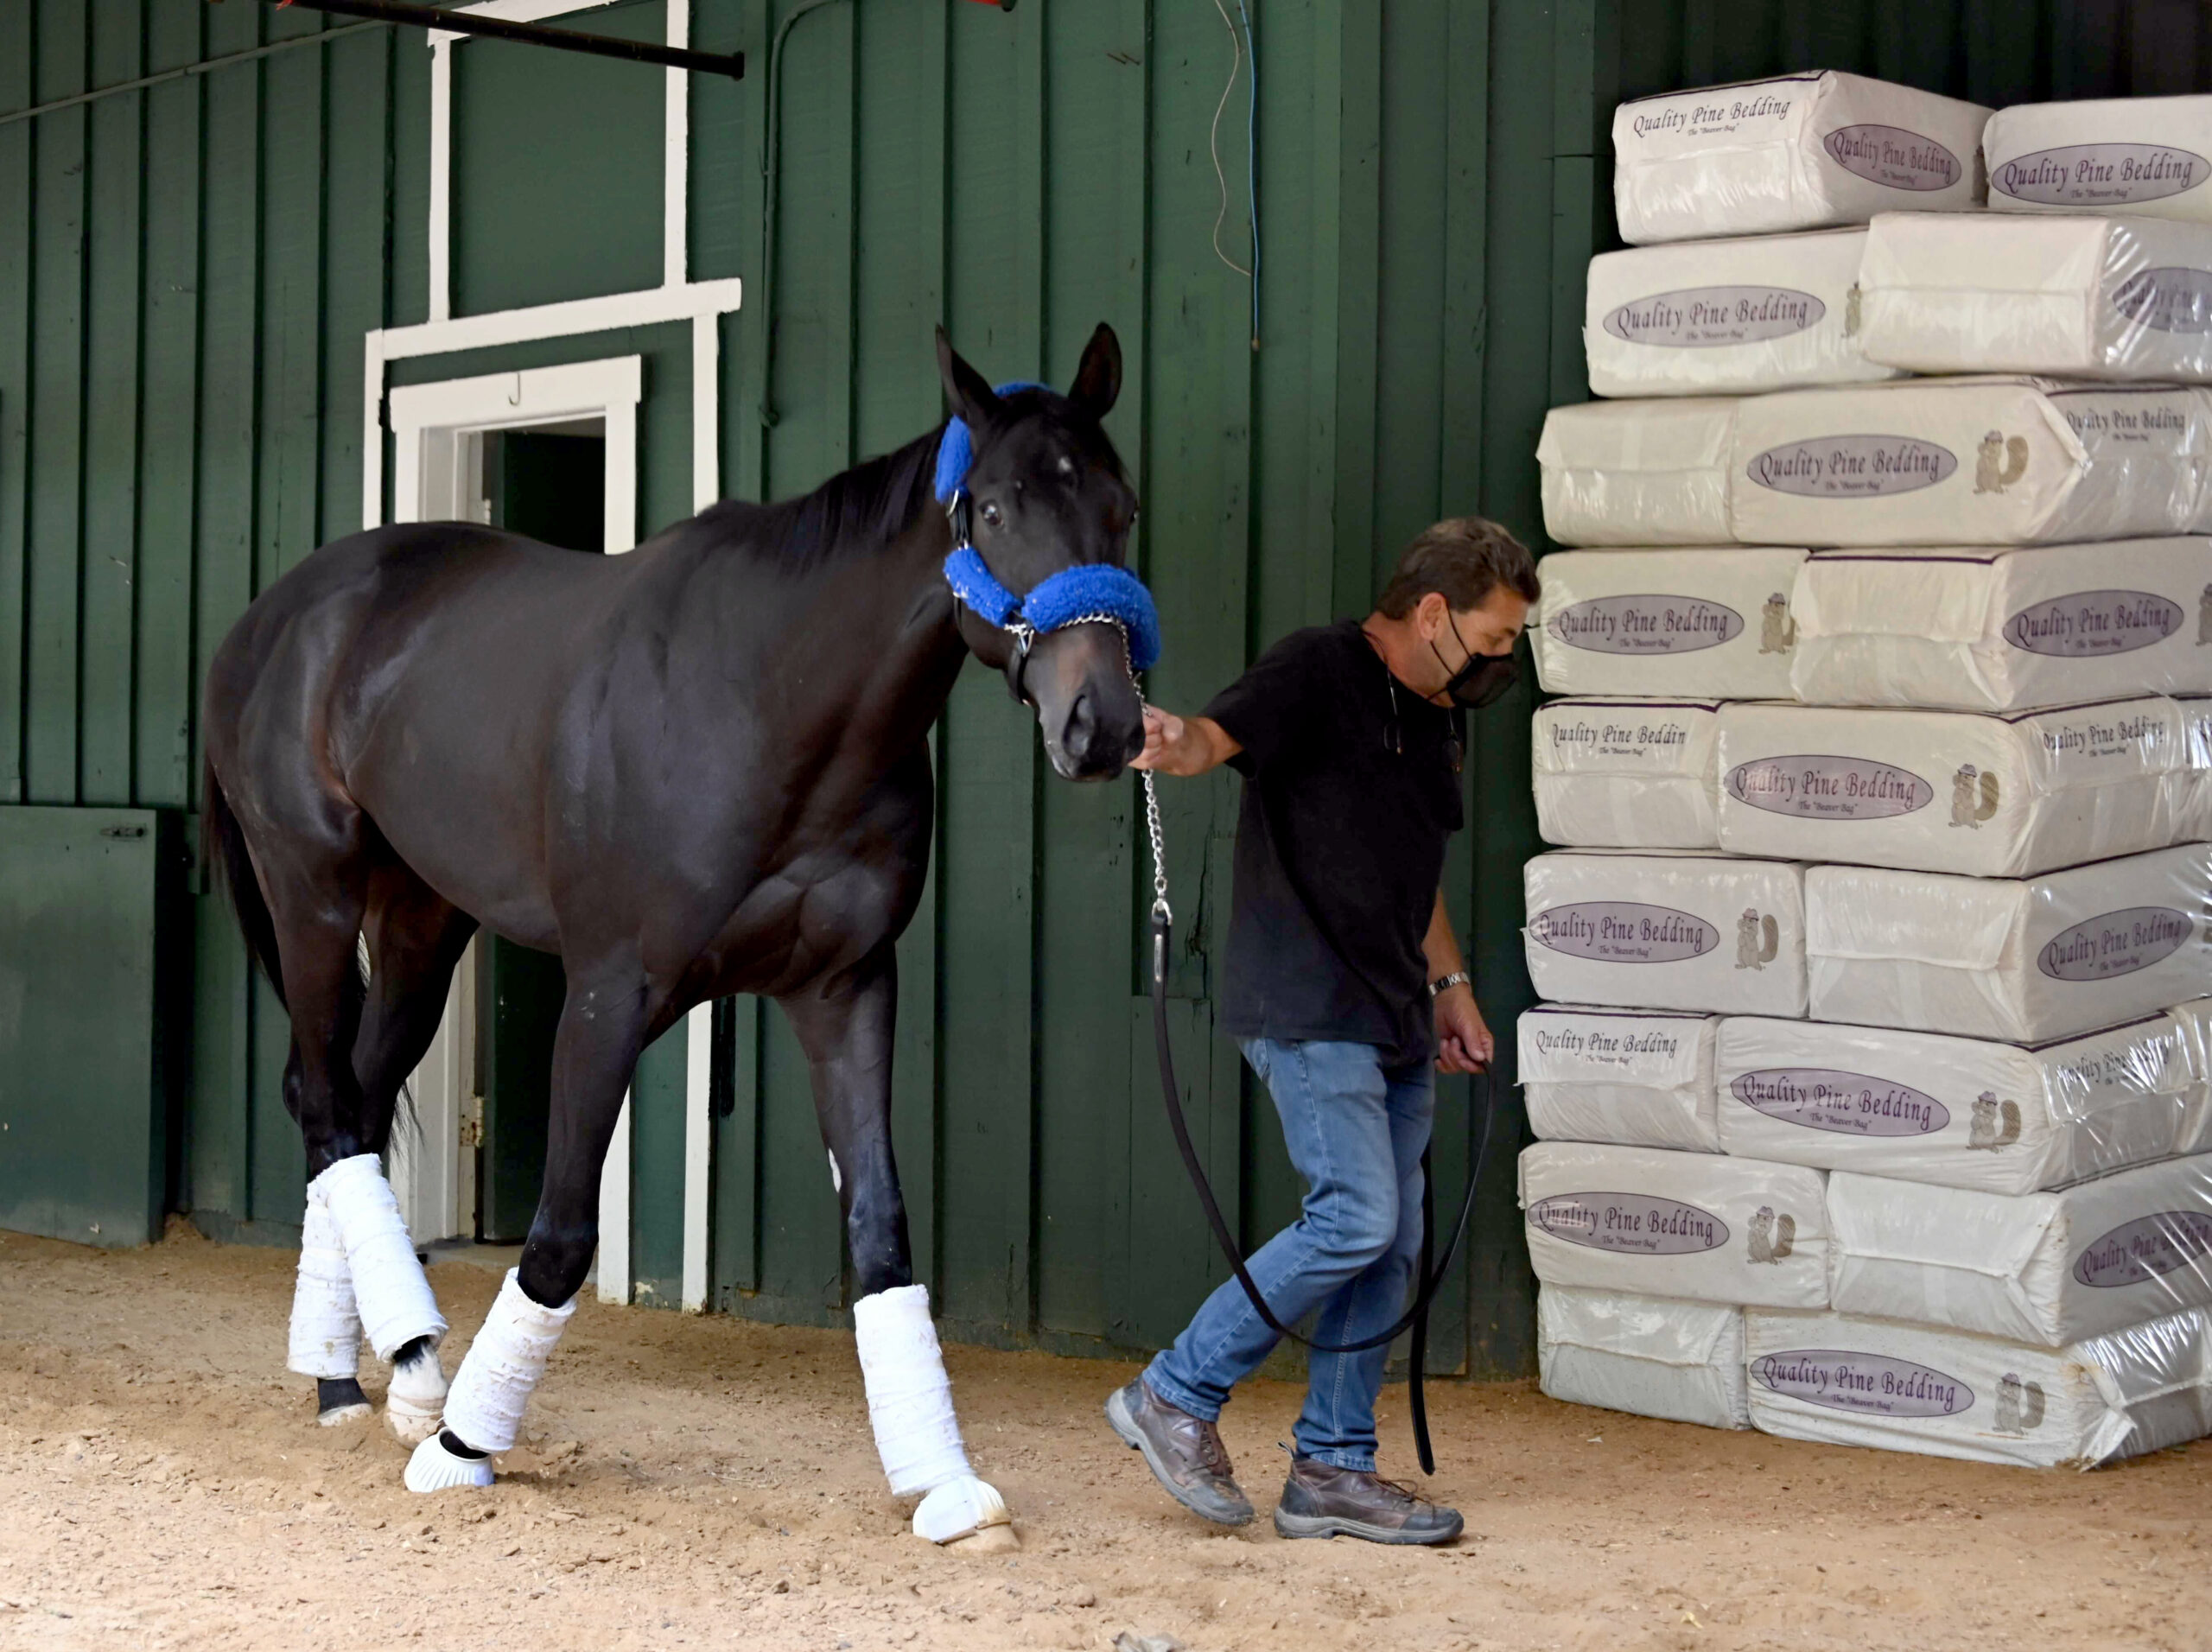 Kentucky Derby winner Medina Spirit walks around the Stakes Barn with assistant trainer Jimmy Barnes after arriving at Pimlico Race Course Monday, May 10, 2021. (Lloyd Fox/The Baltimore Sun via AP)./The Baltimore Sun via AP)